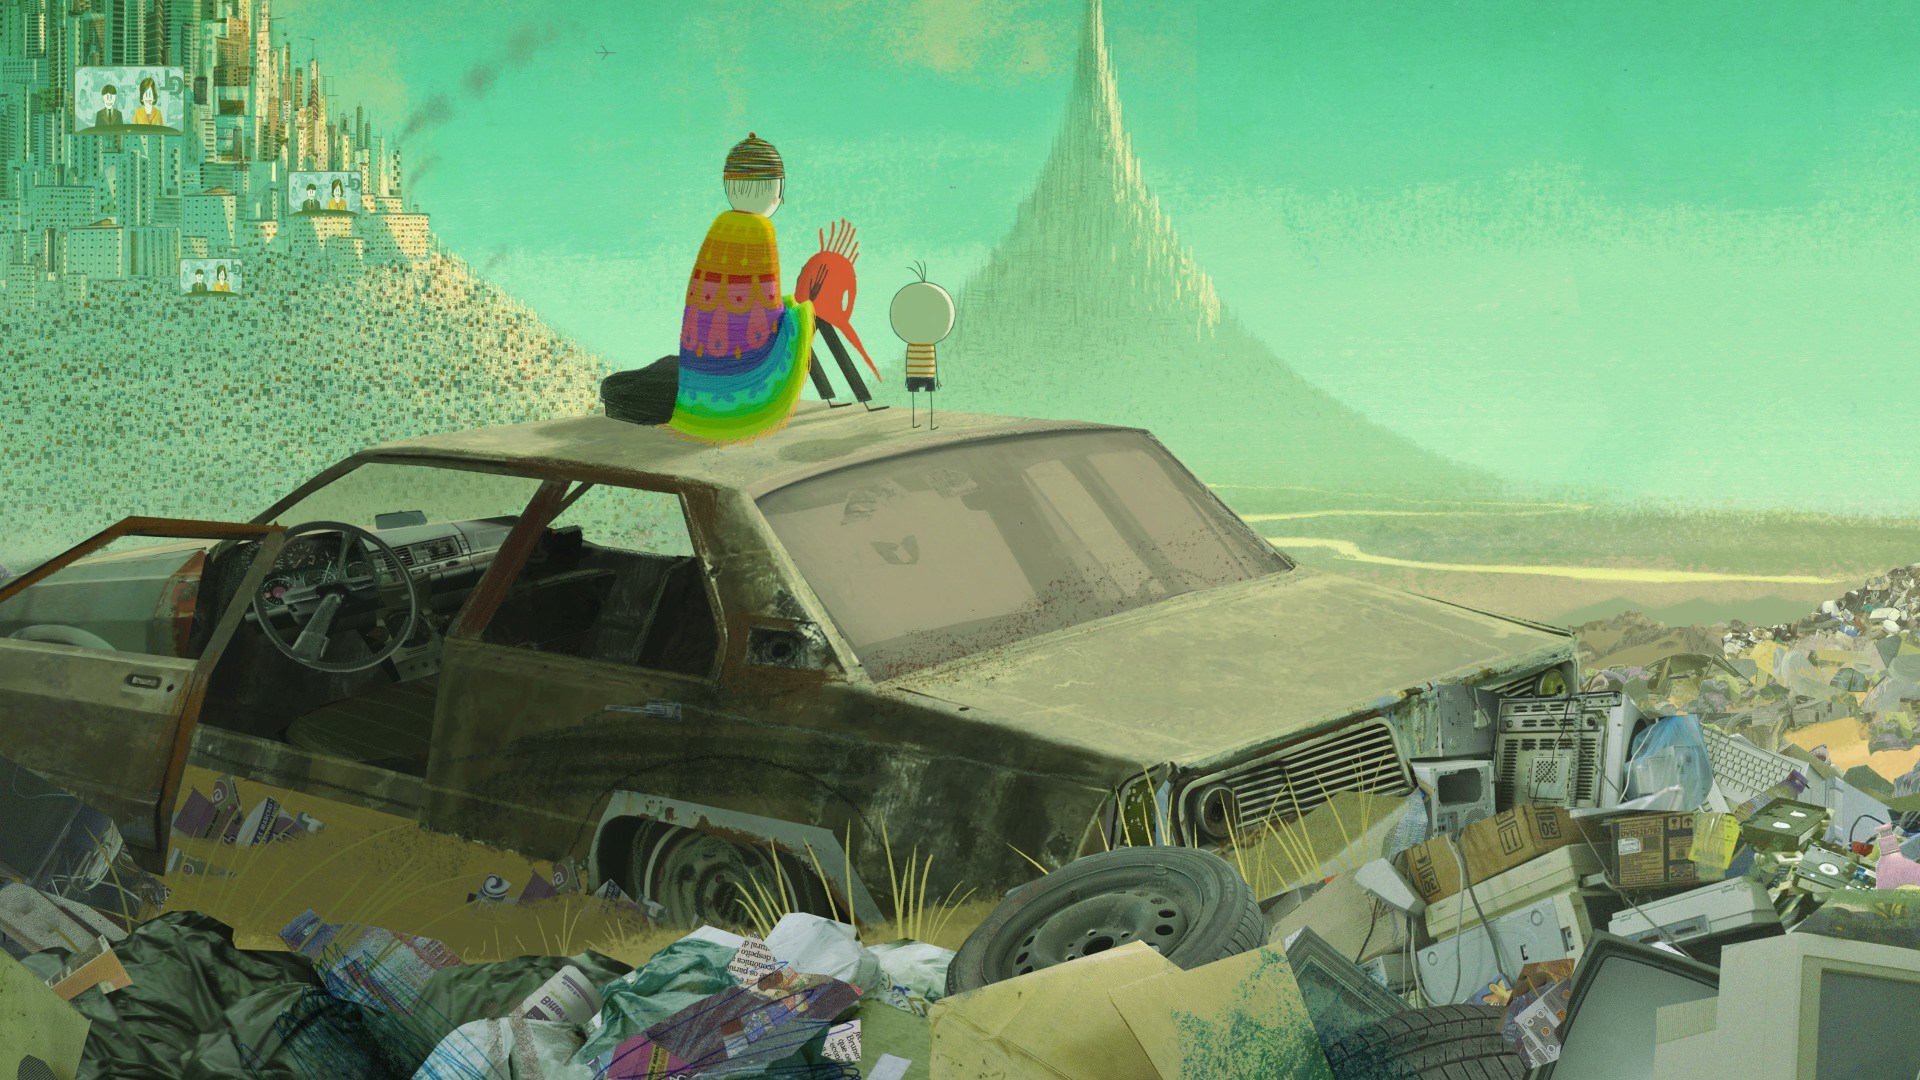 A scene from GKIDS' Boy and the World (2015)